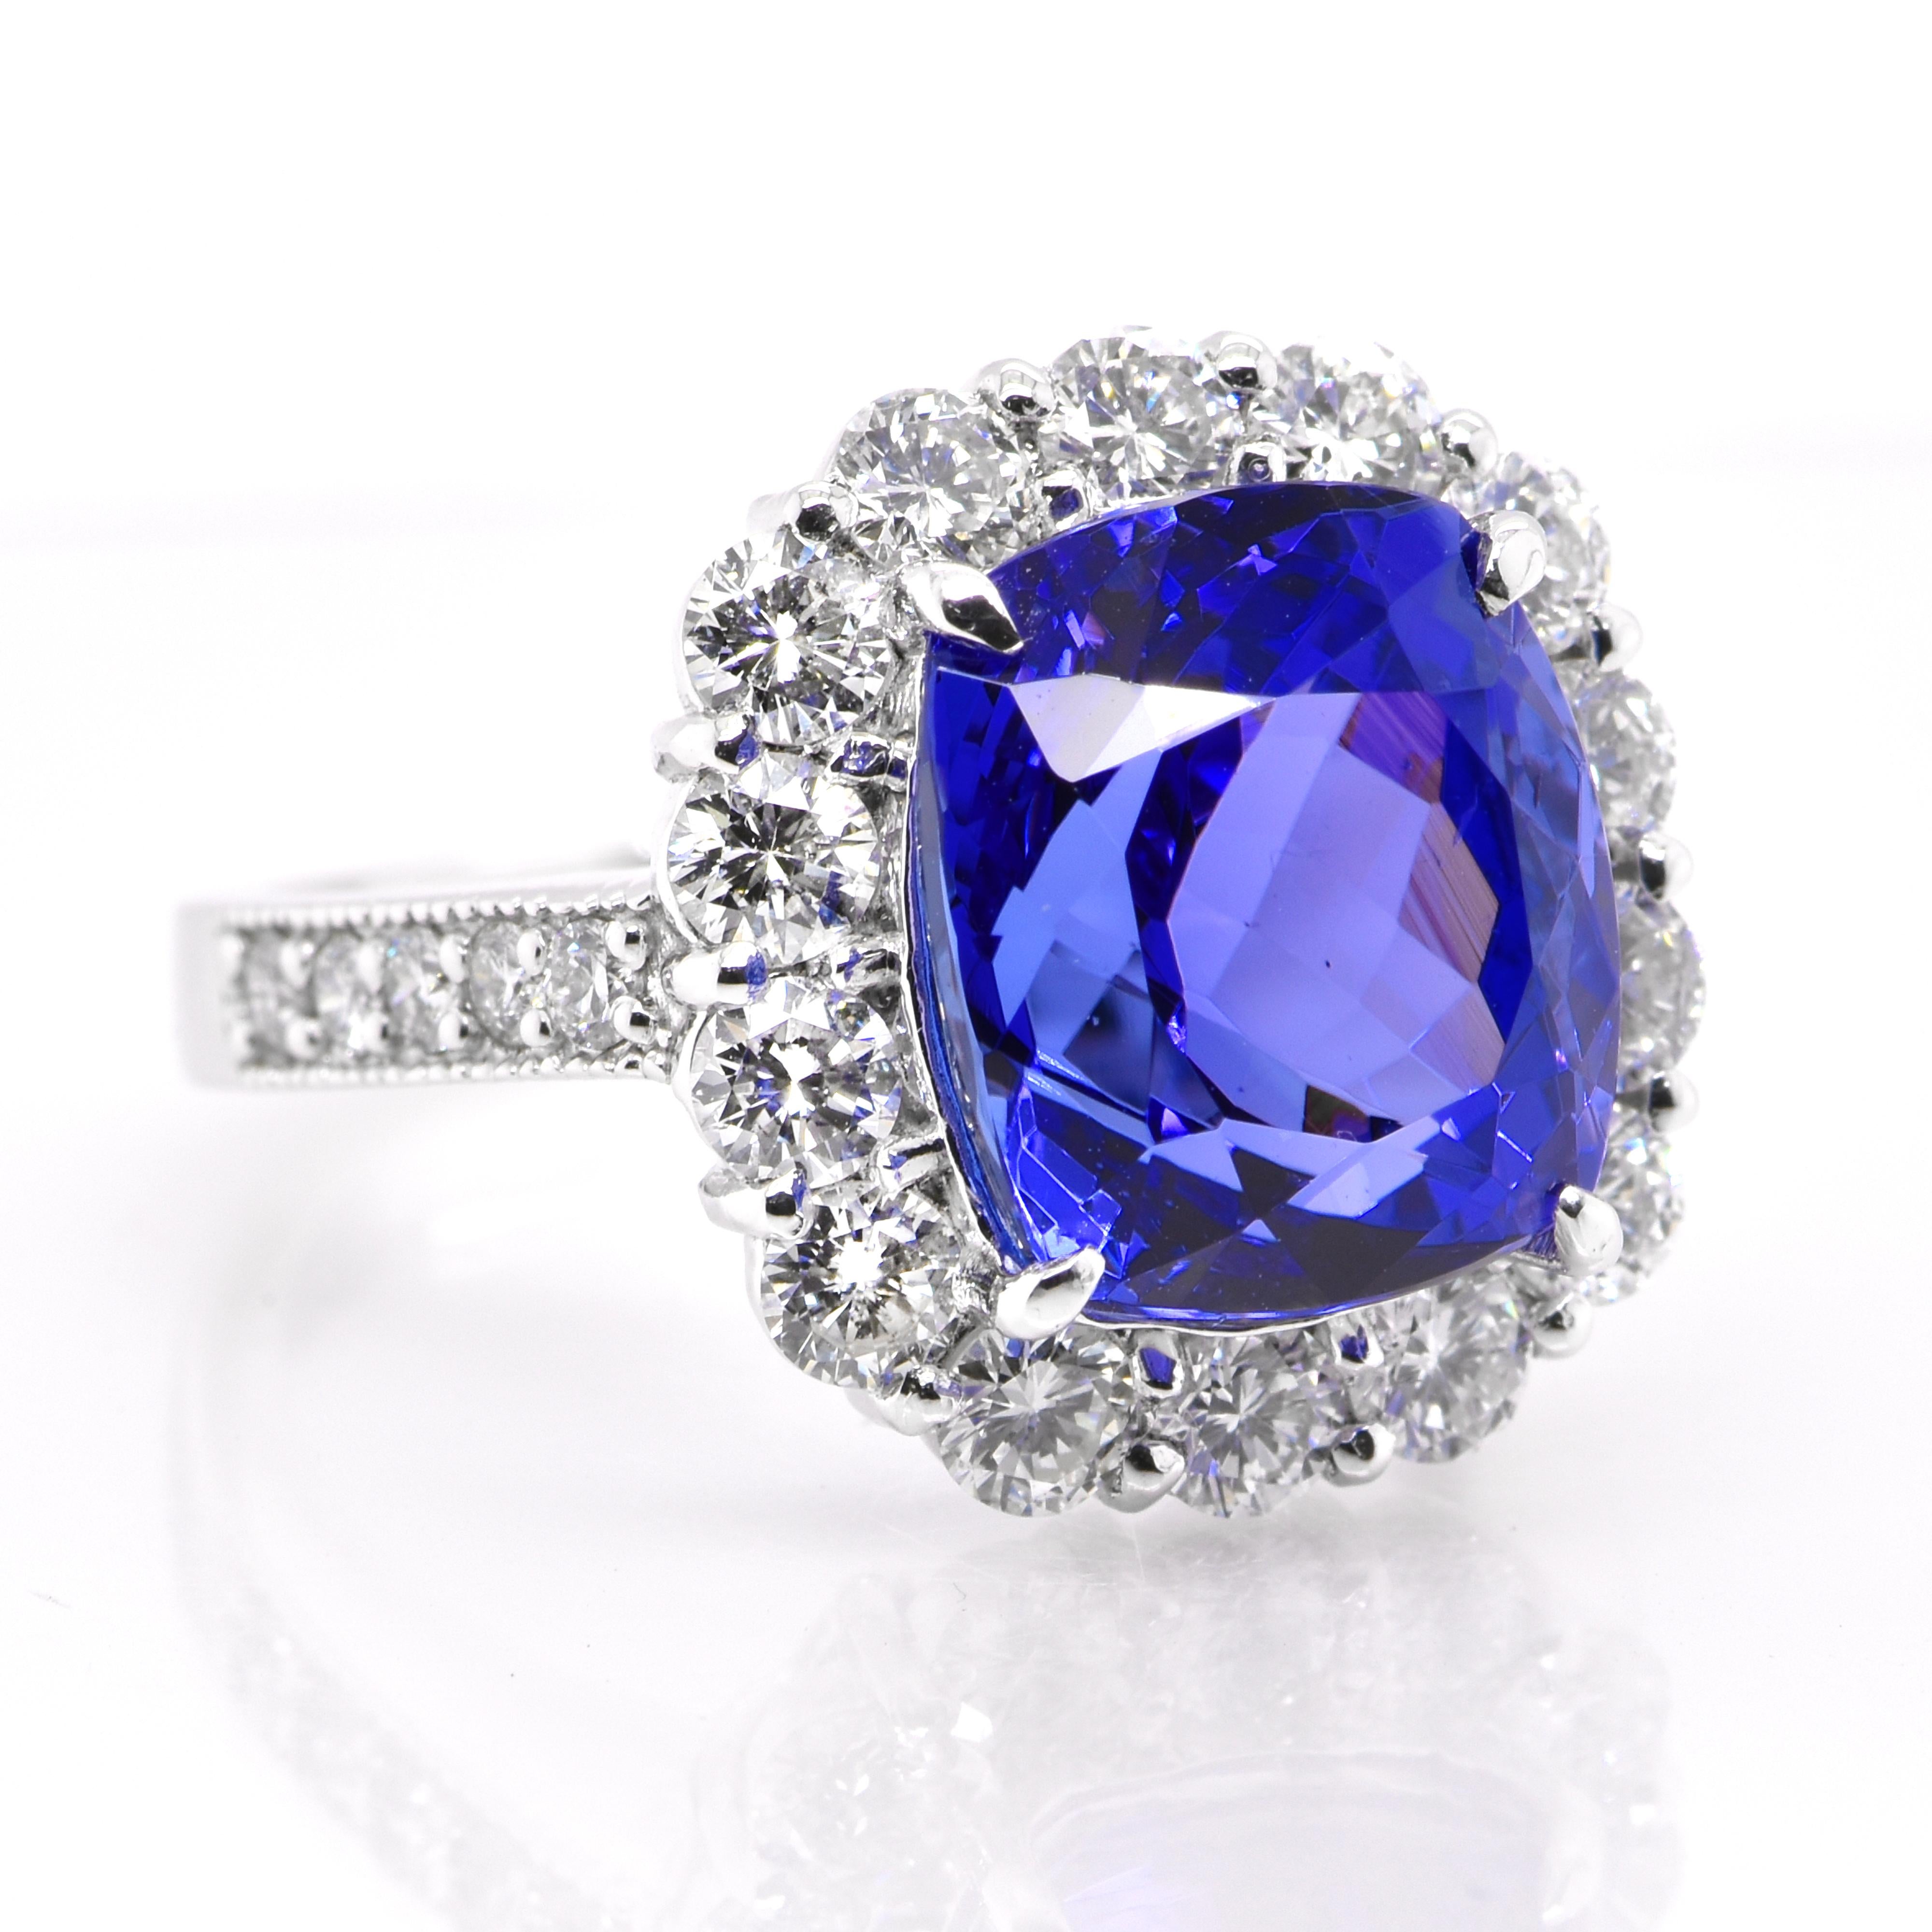 Modern 6.94 Carat Natural Cushion AAA+ Tanzanite and Diamond Ring Set in Platinum For Sale